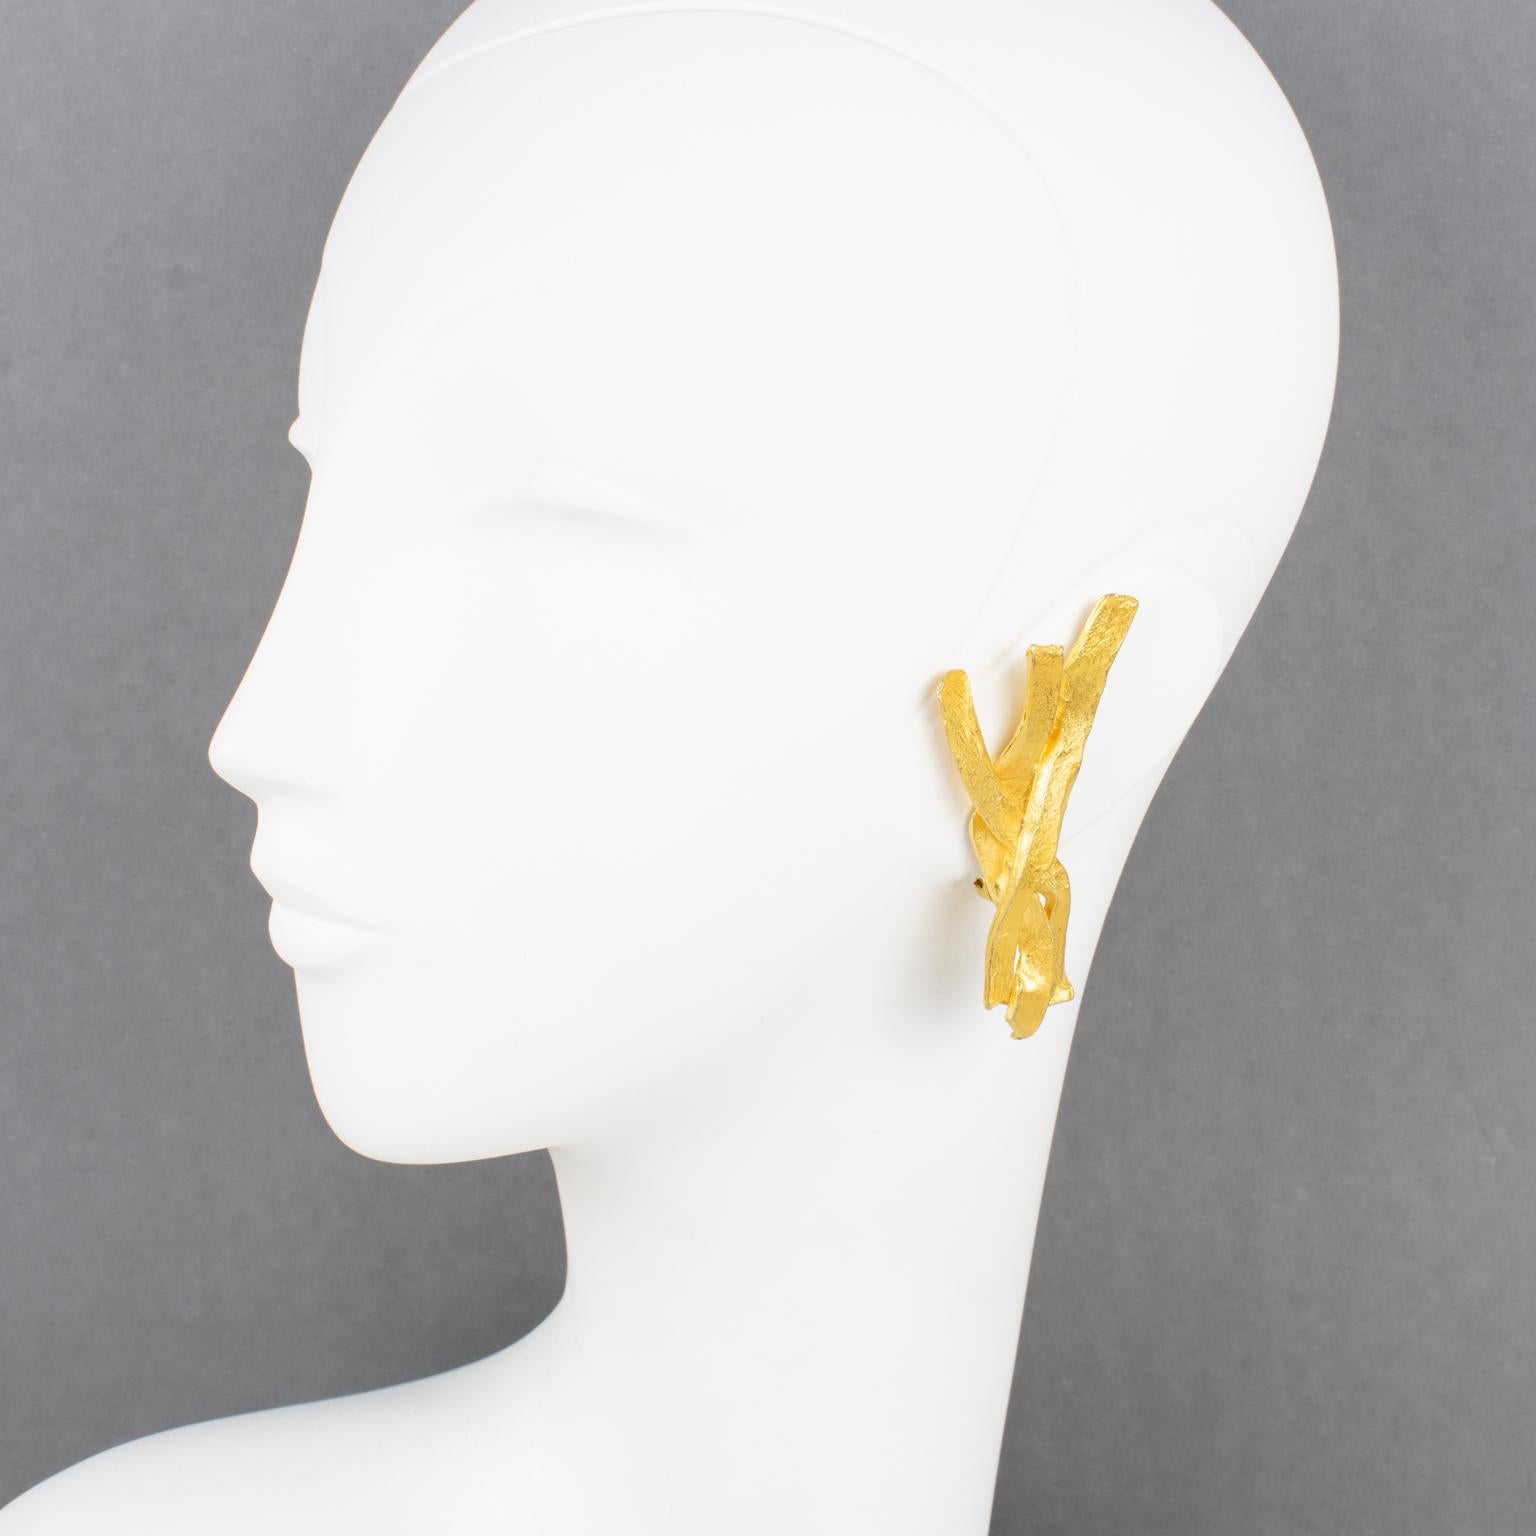 These elegant Edouard Rambaud Paris clip-on earrings feature a dimensional carved stylized branches-shaped design in textured gilt metal with a hand-made feel and satin finish aspect. They are signed with the designer's logo on the